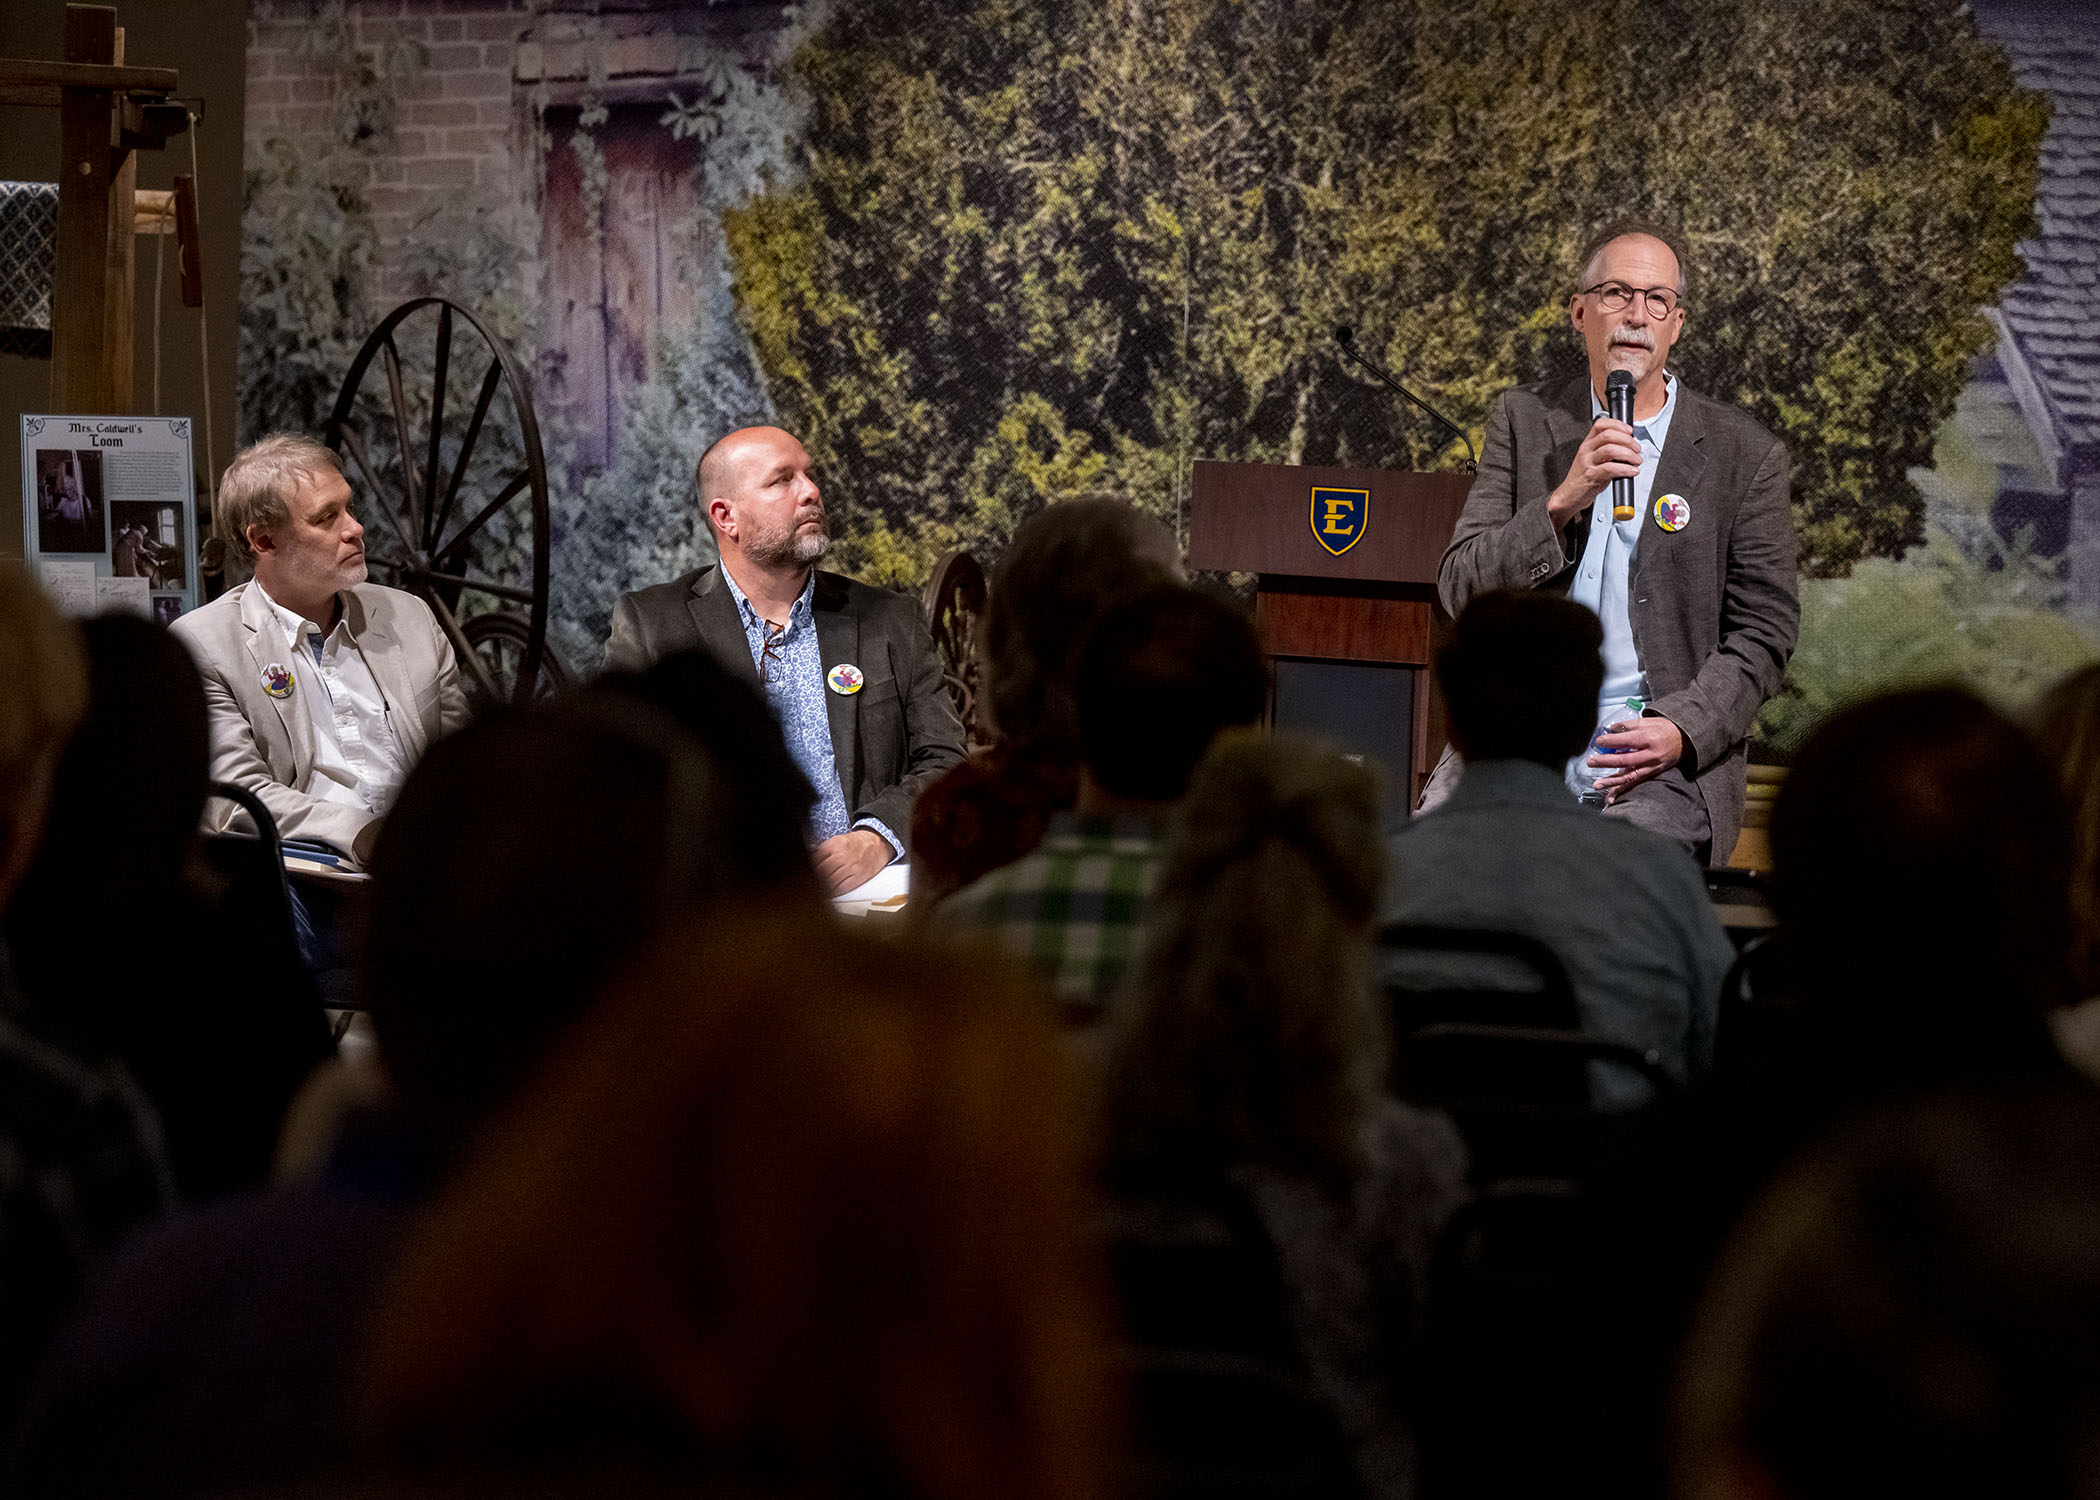 Keynote speaker Daniel Wallace joins a roundtable discussion with Dr. Jesse Graves and Dr. Scott Honeycutt to discuss his new memoir, This Isn't Going to End Well, and the legacy of William Nealy. 